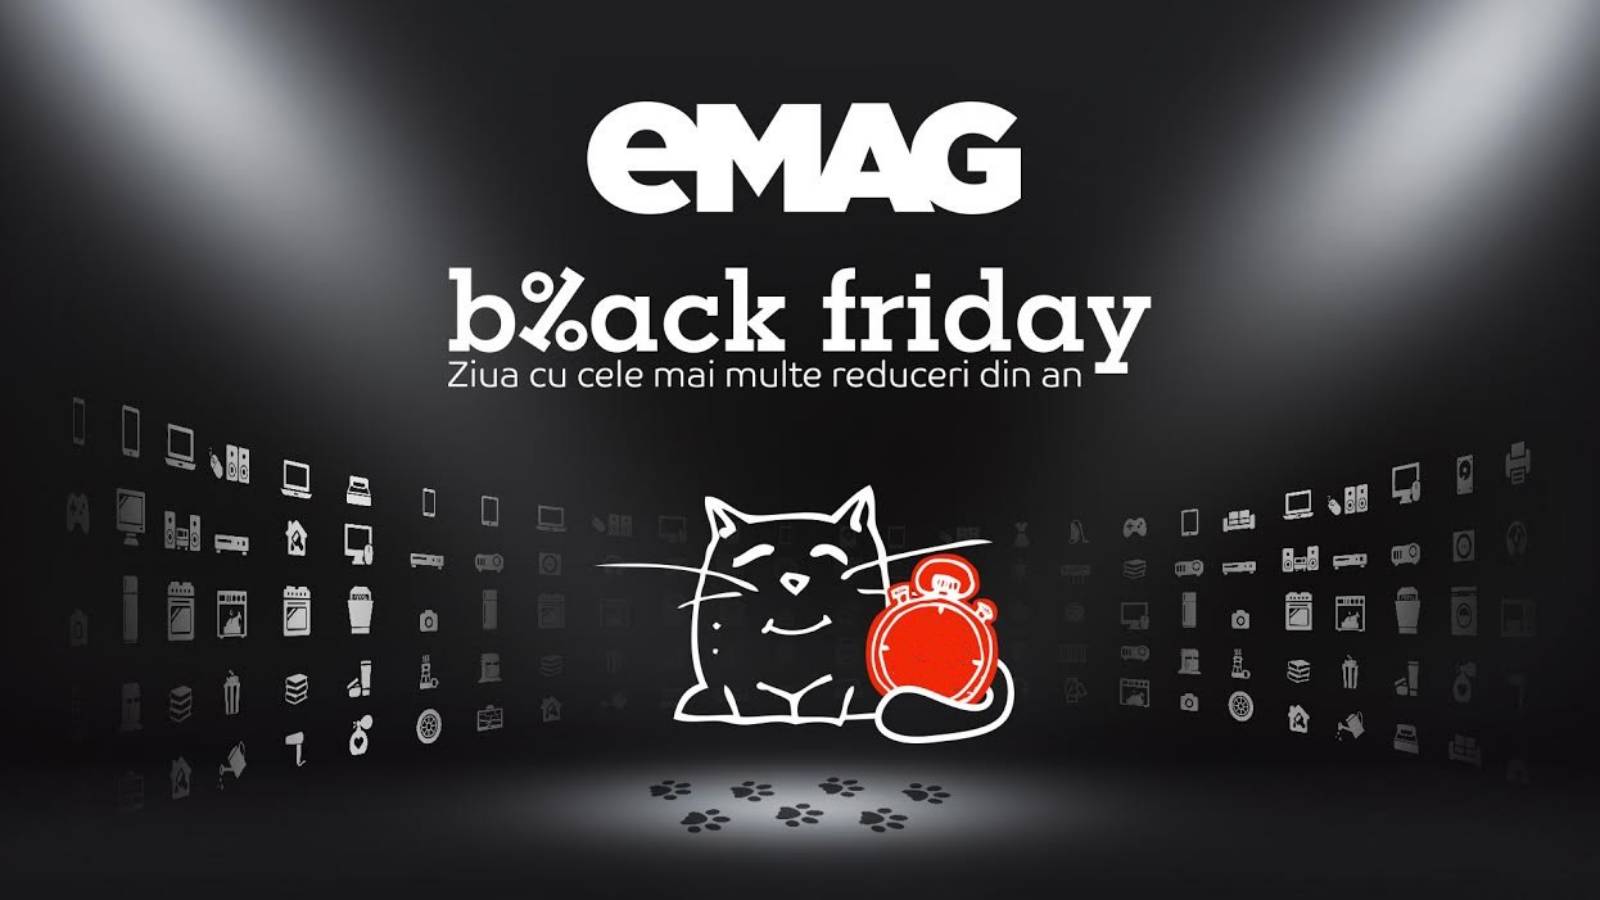 eMAG BLACK FRIDAY list 30 Products Discounts